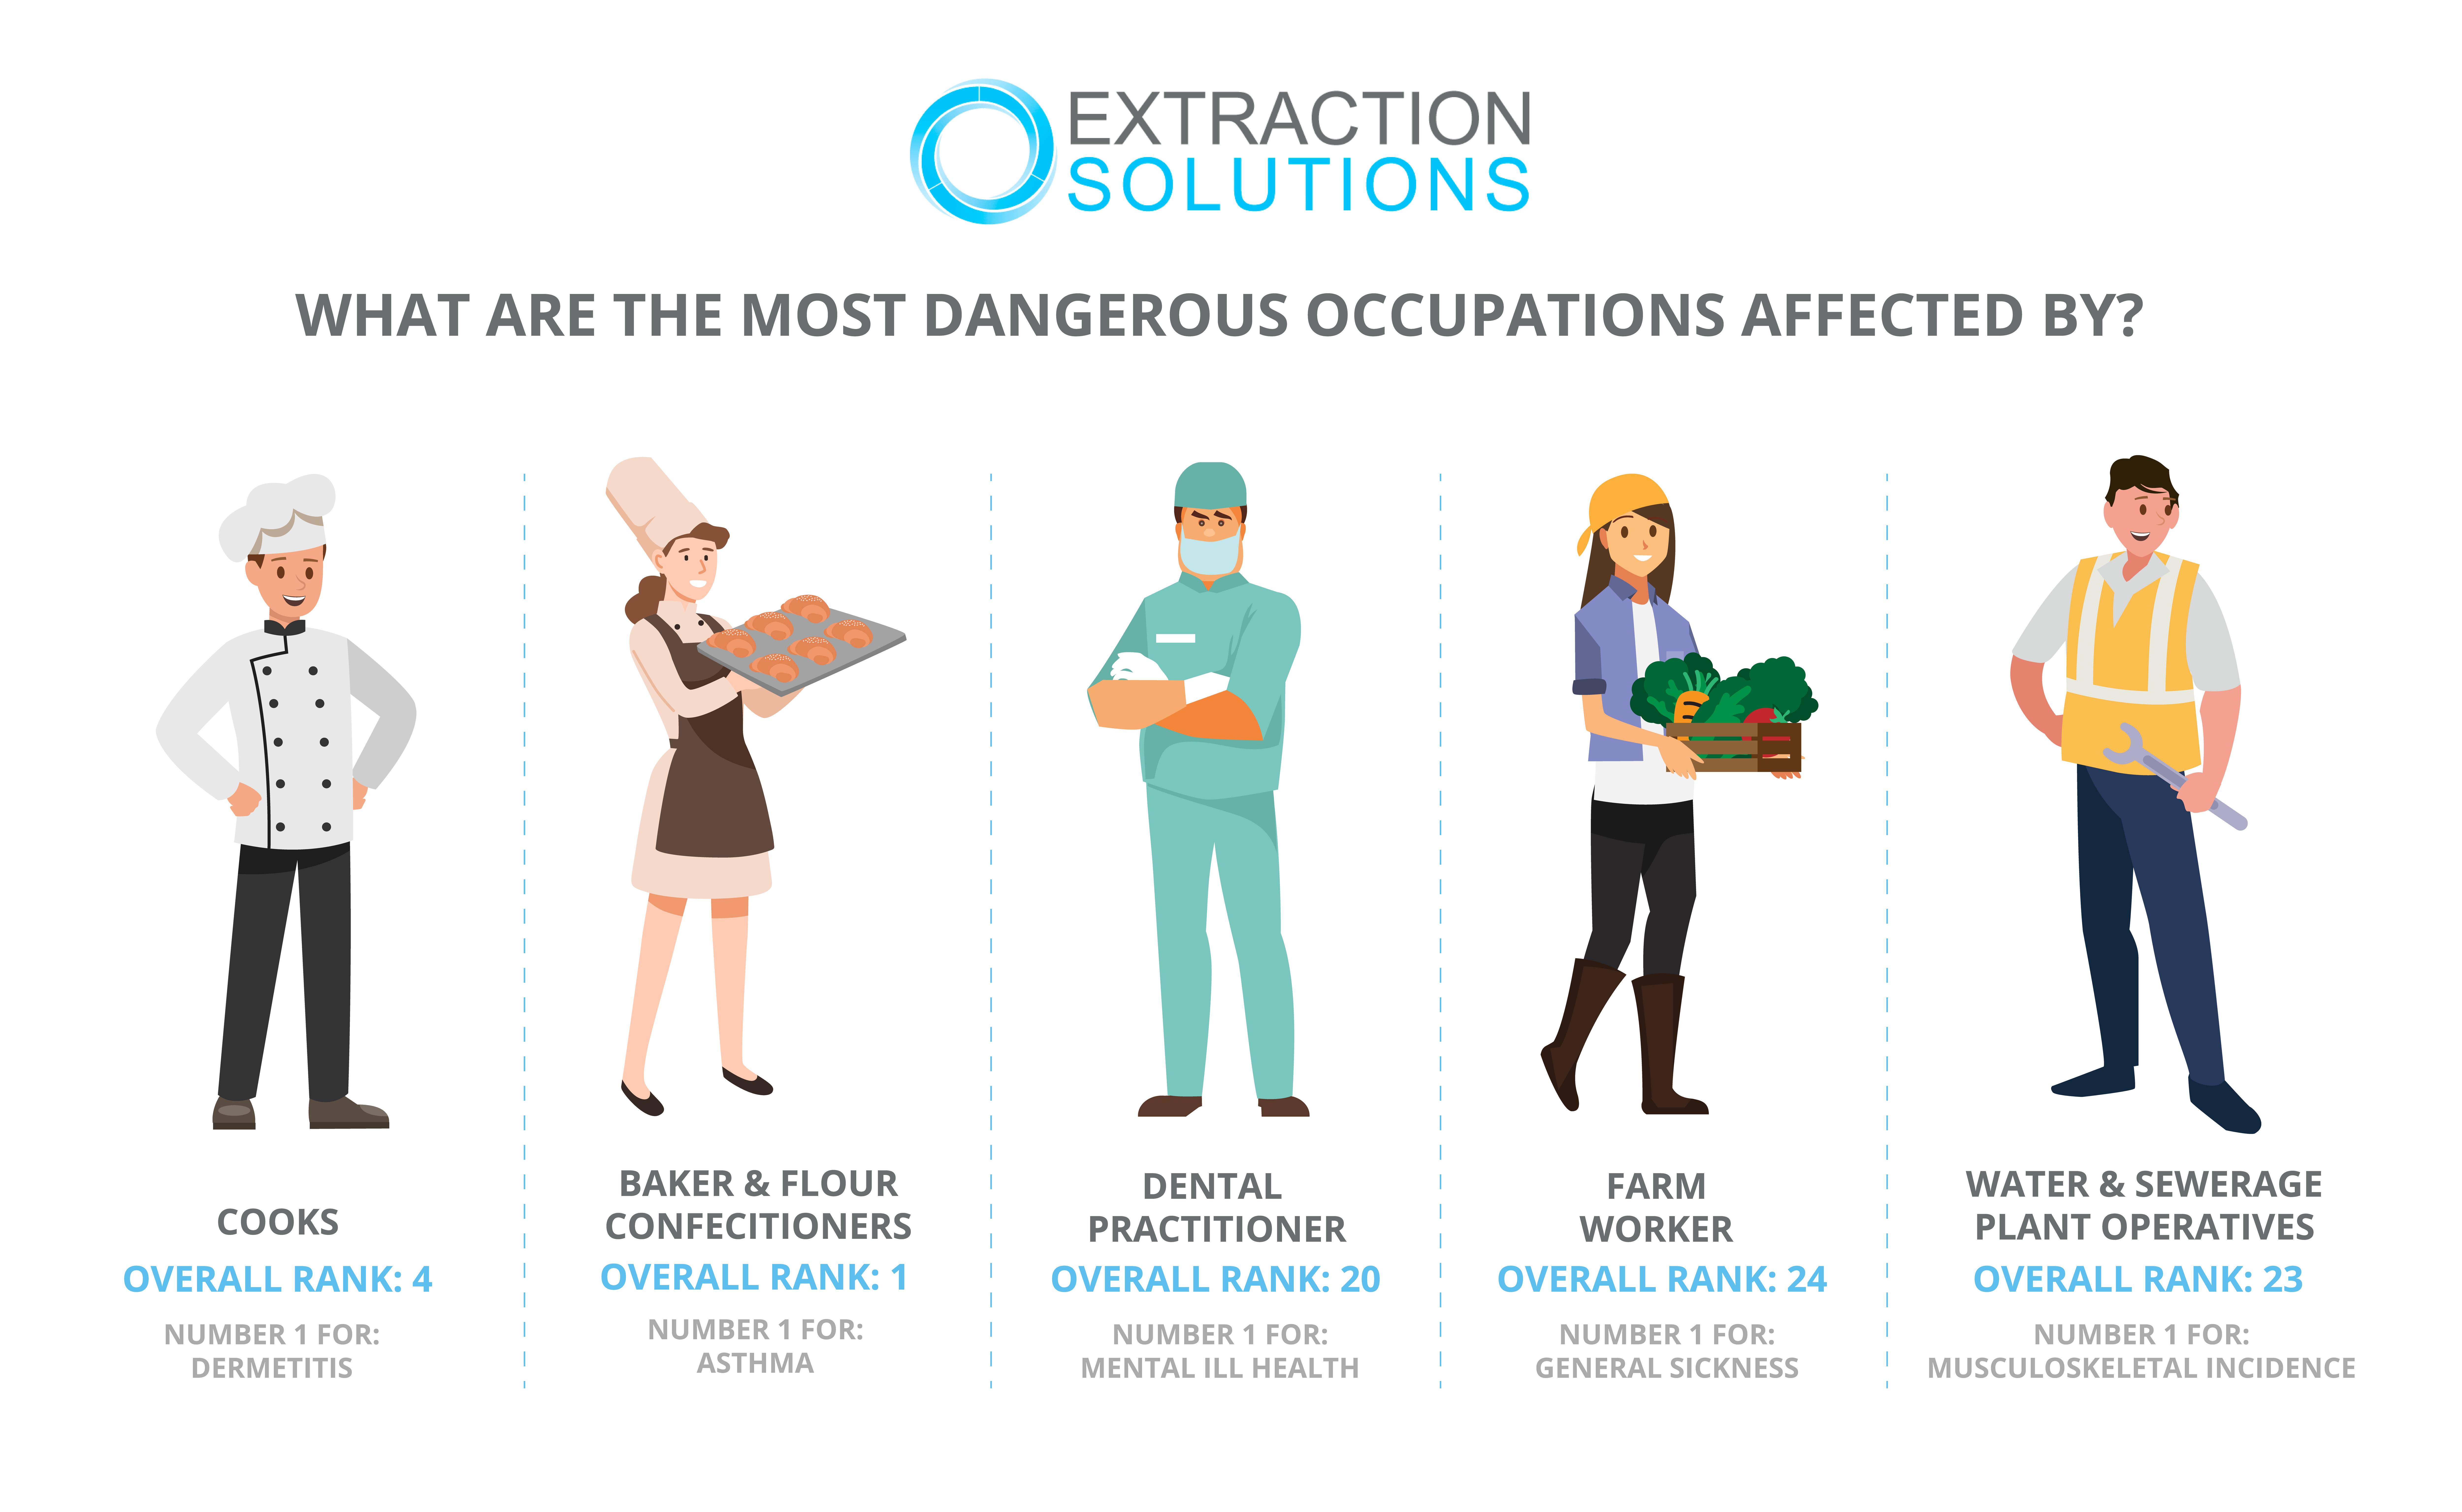 What are the most dangerous occupations for each illness